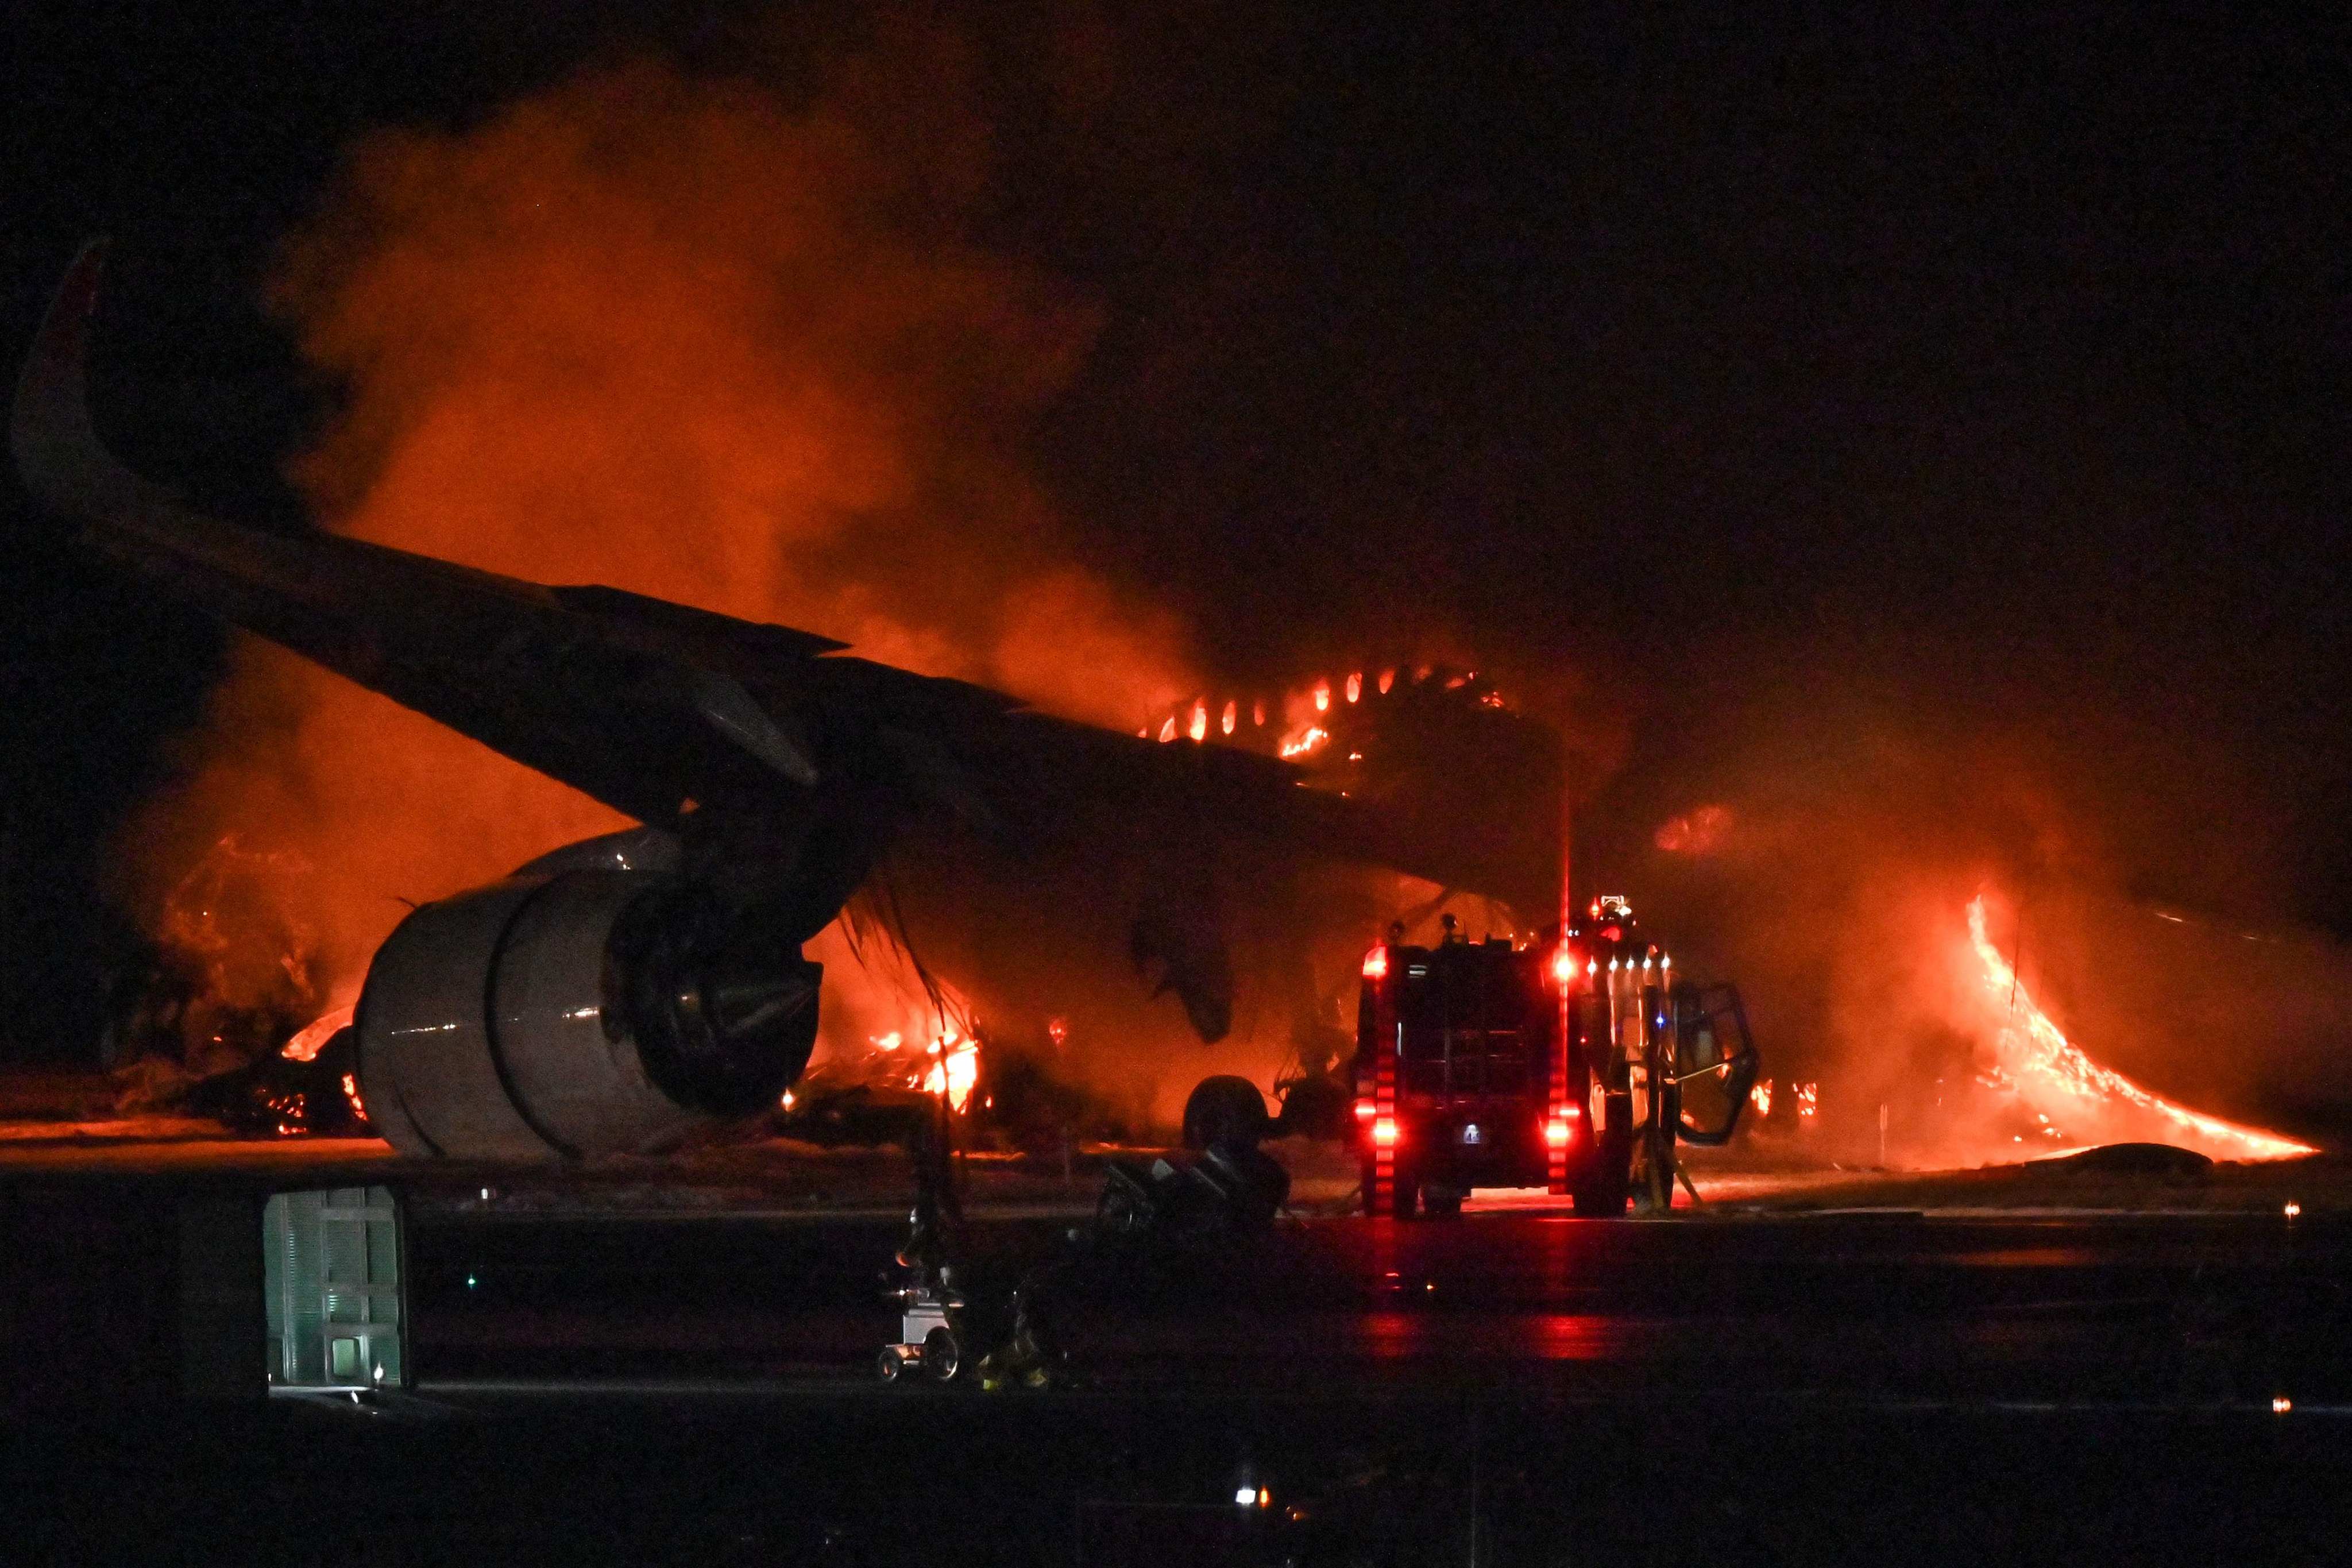 A Japan Airlines passenger plane seen on fire on the tarmac at Tokyo’s Haneda airport on Tuesday. Photo: AFP